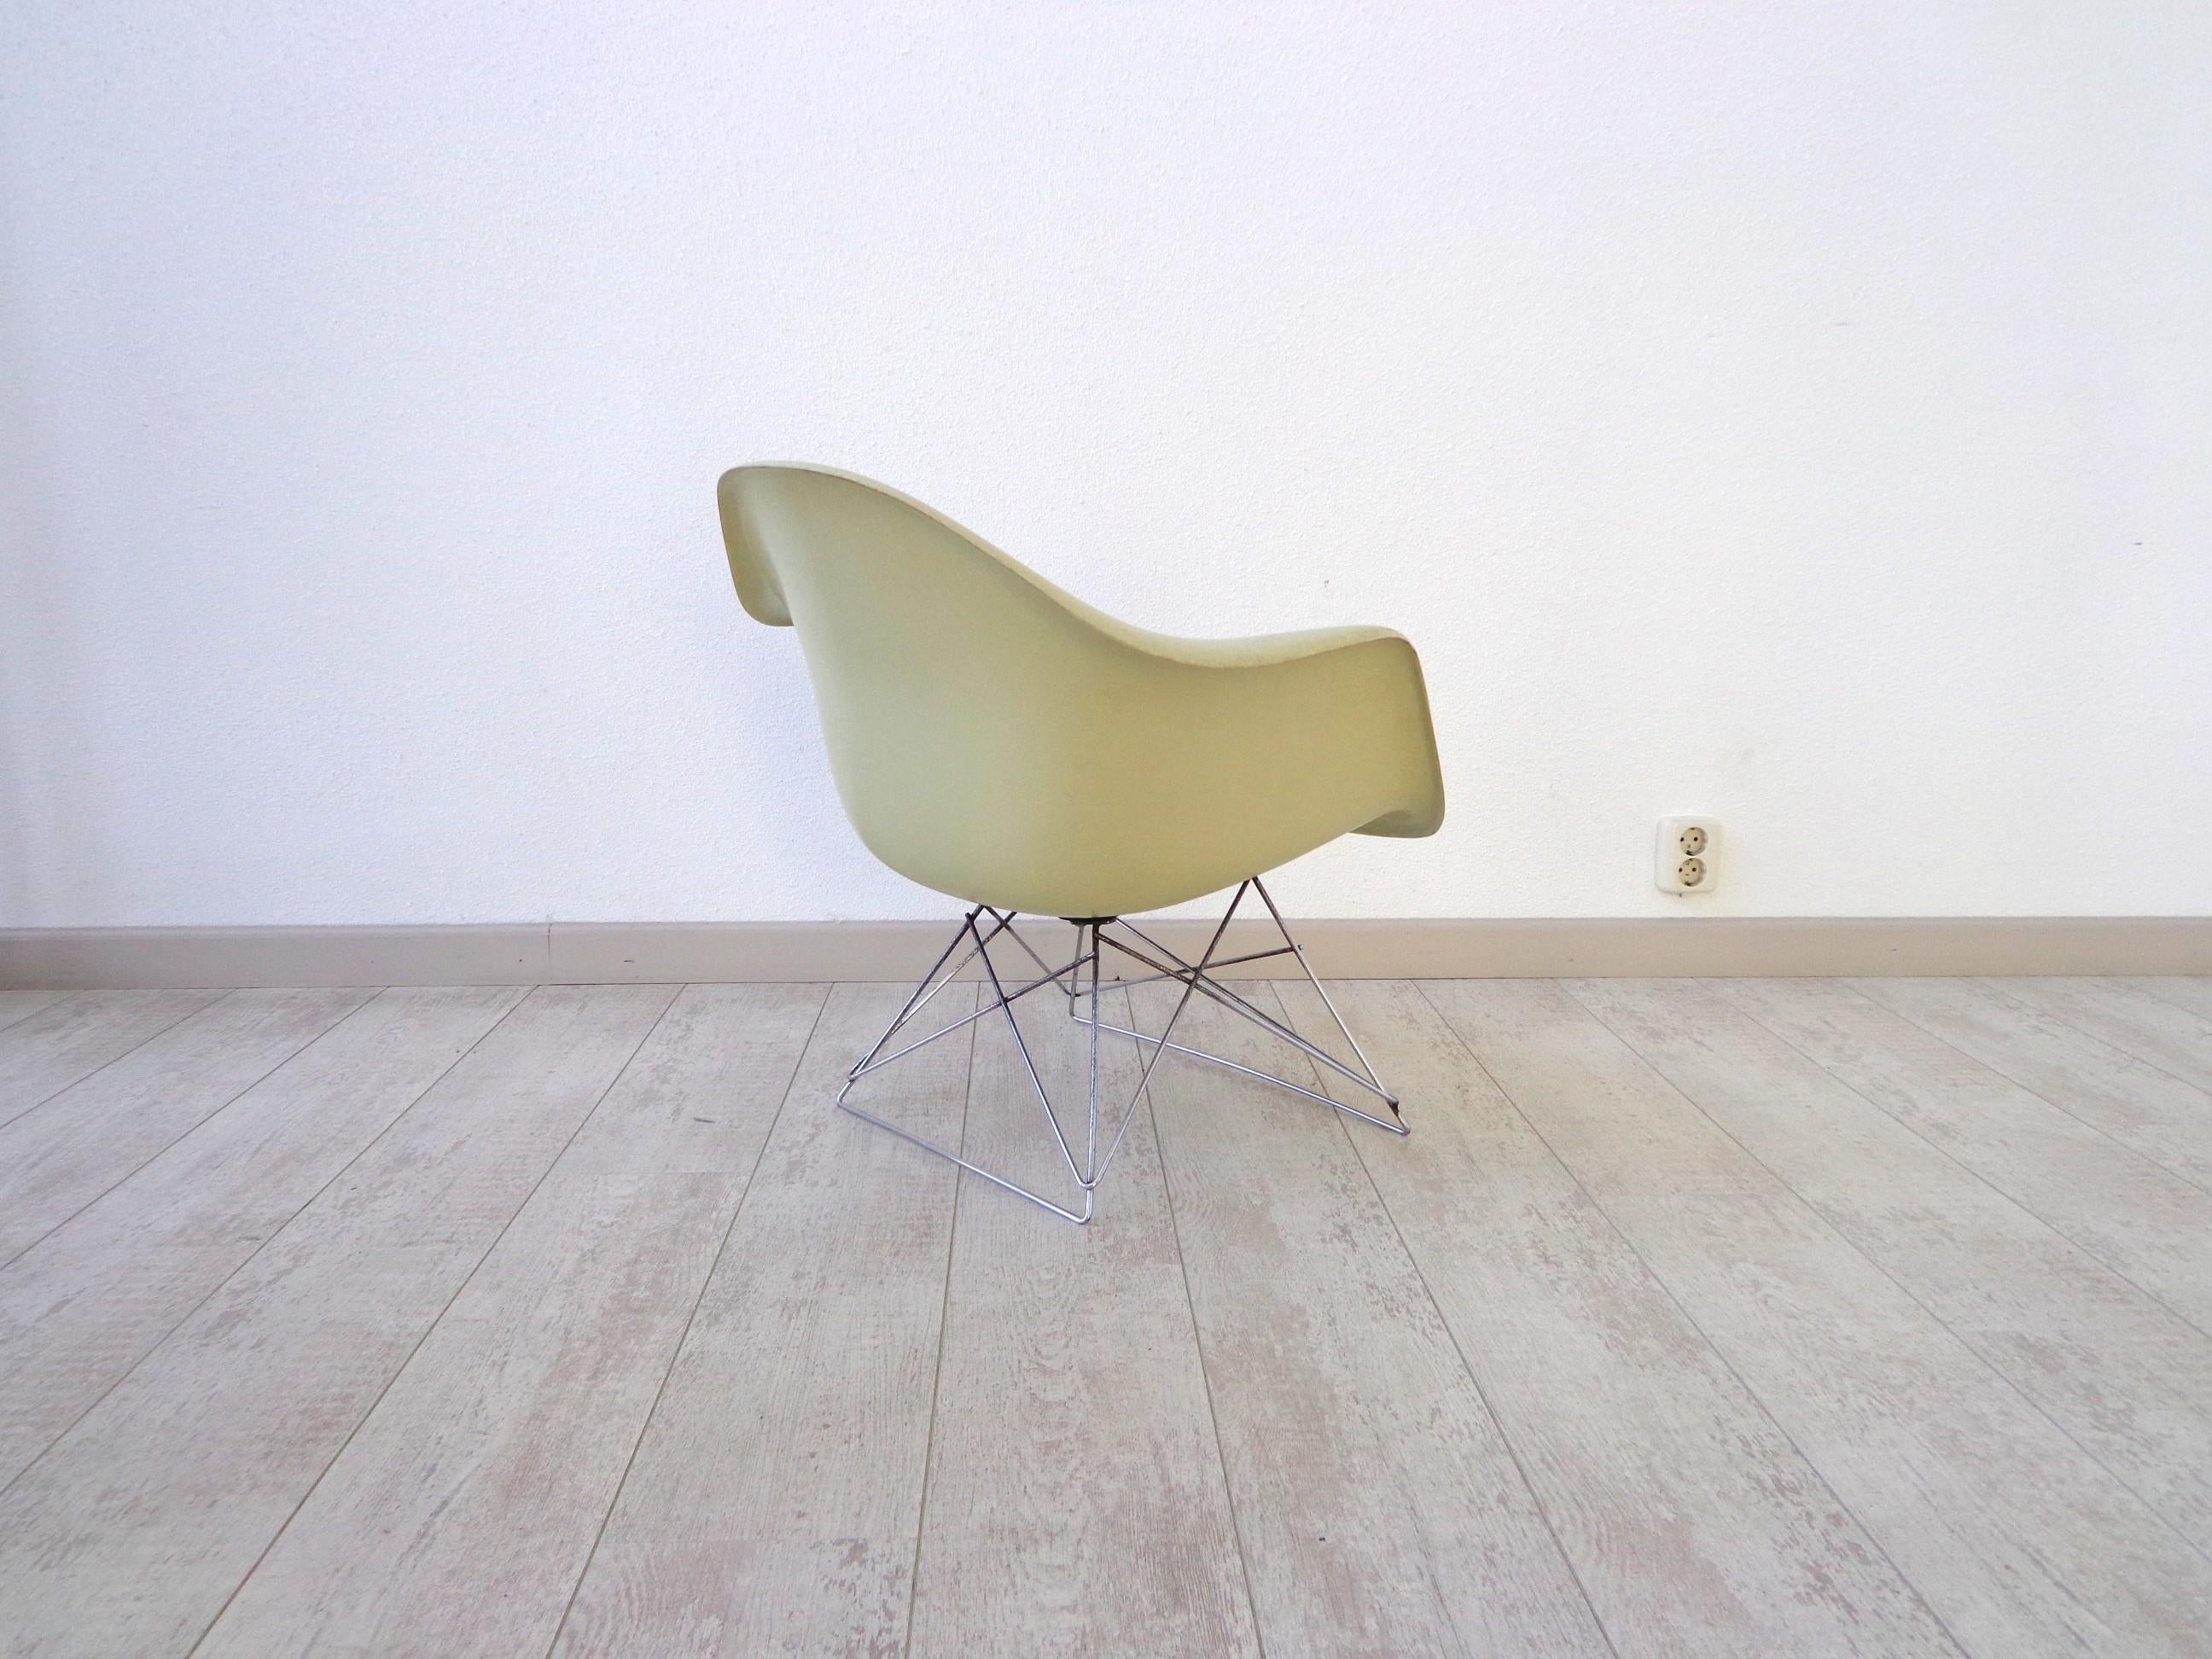 Mid-20th Century LAR Armchair by Charles & Ray Eames for Herman Miller 1960s For Sale